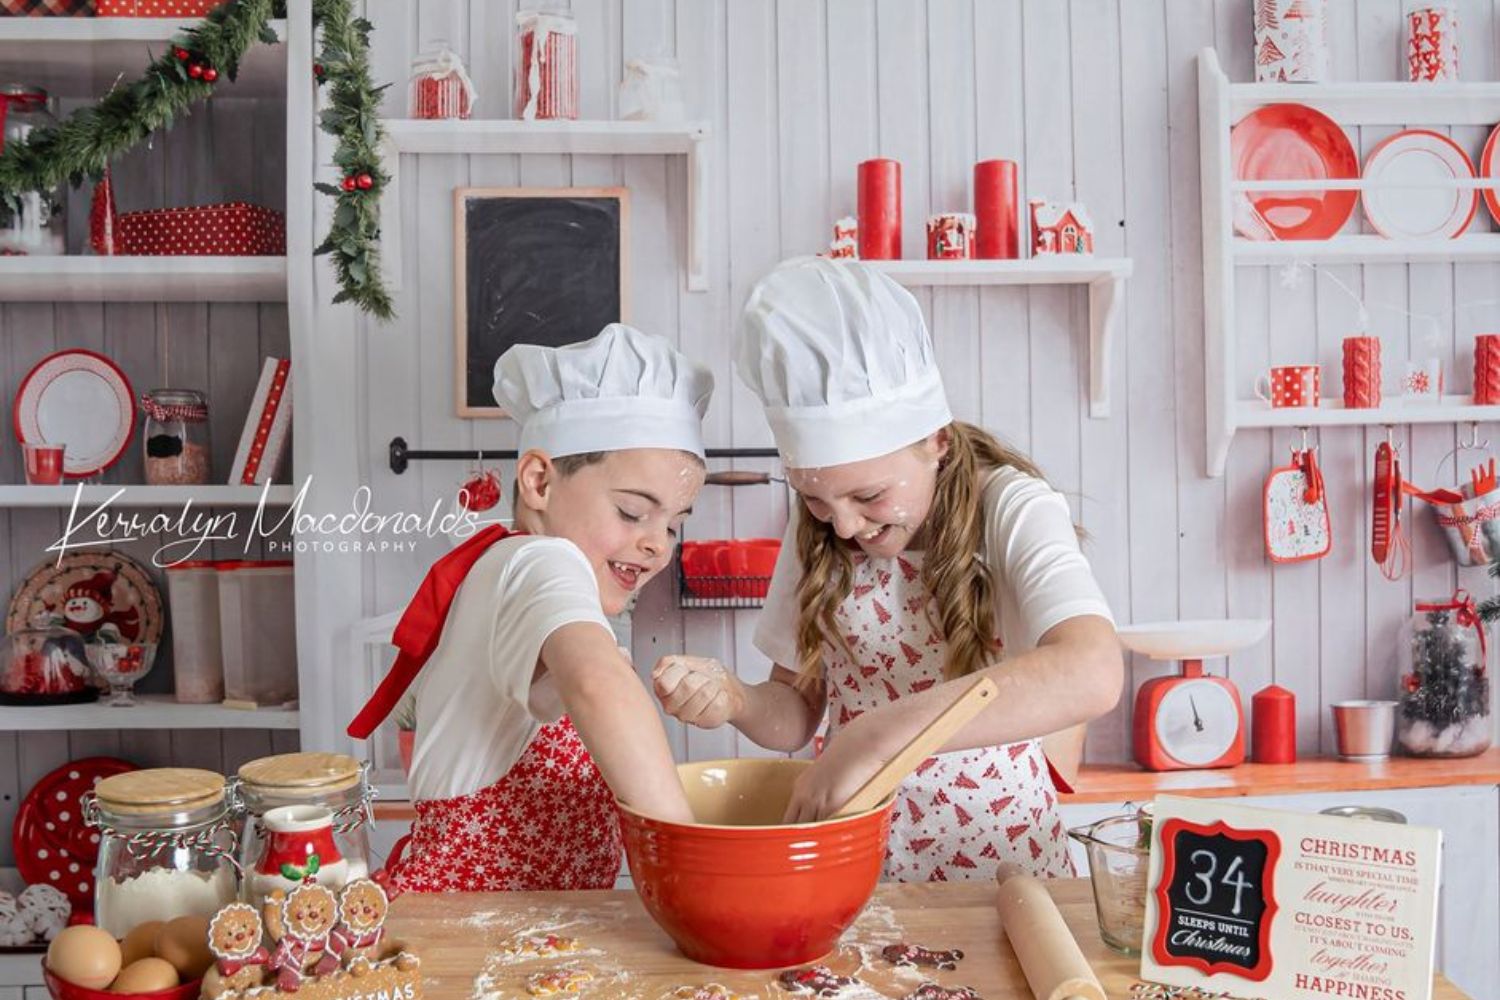 boy and girl baking together in the kitchen